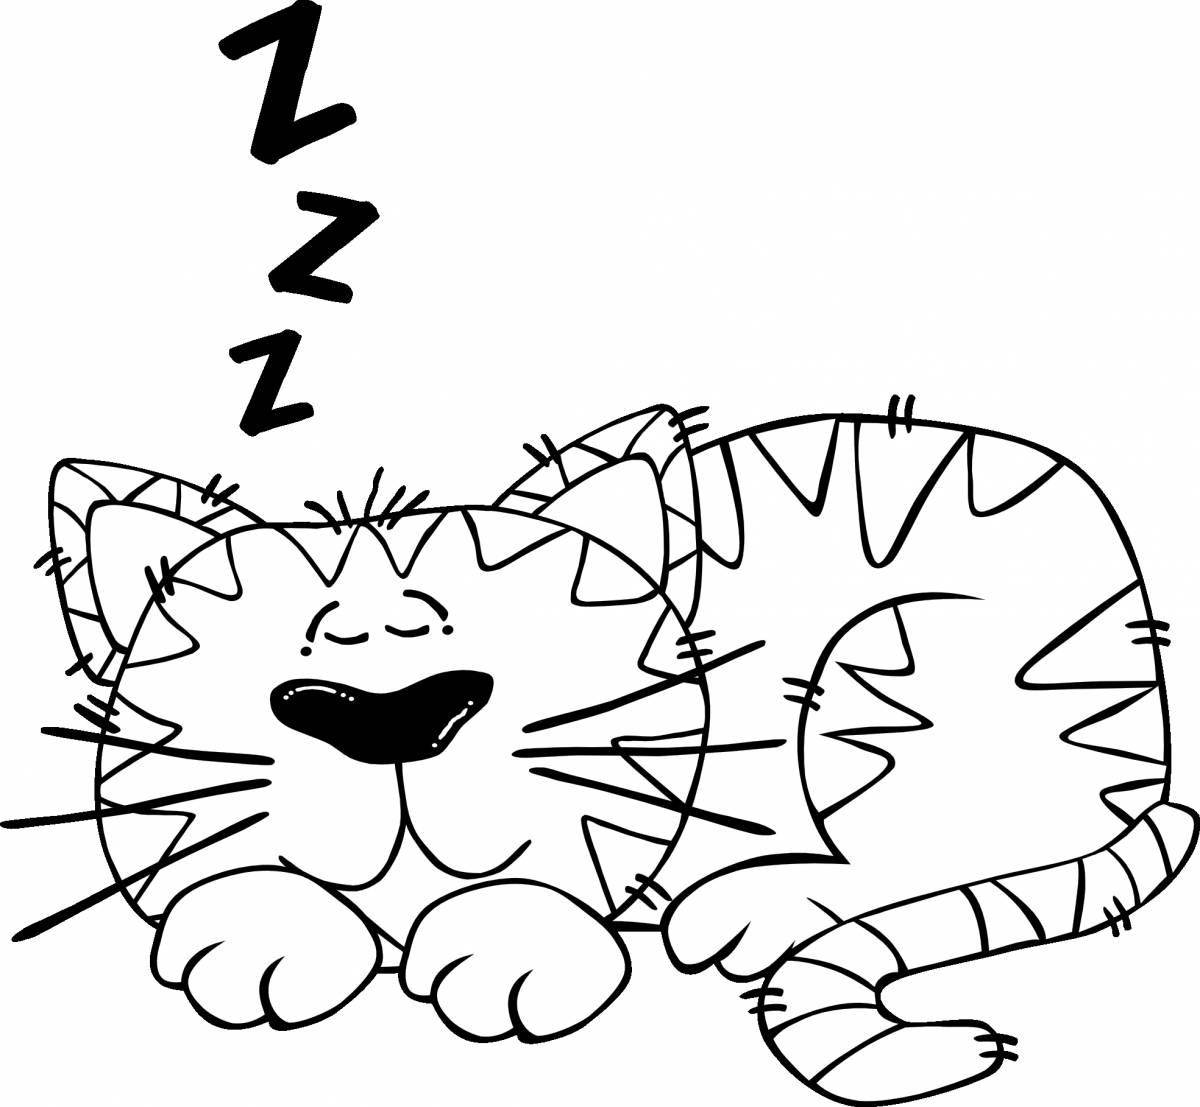 Mystery cat coloring page